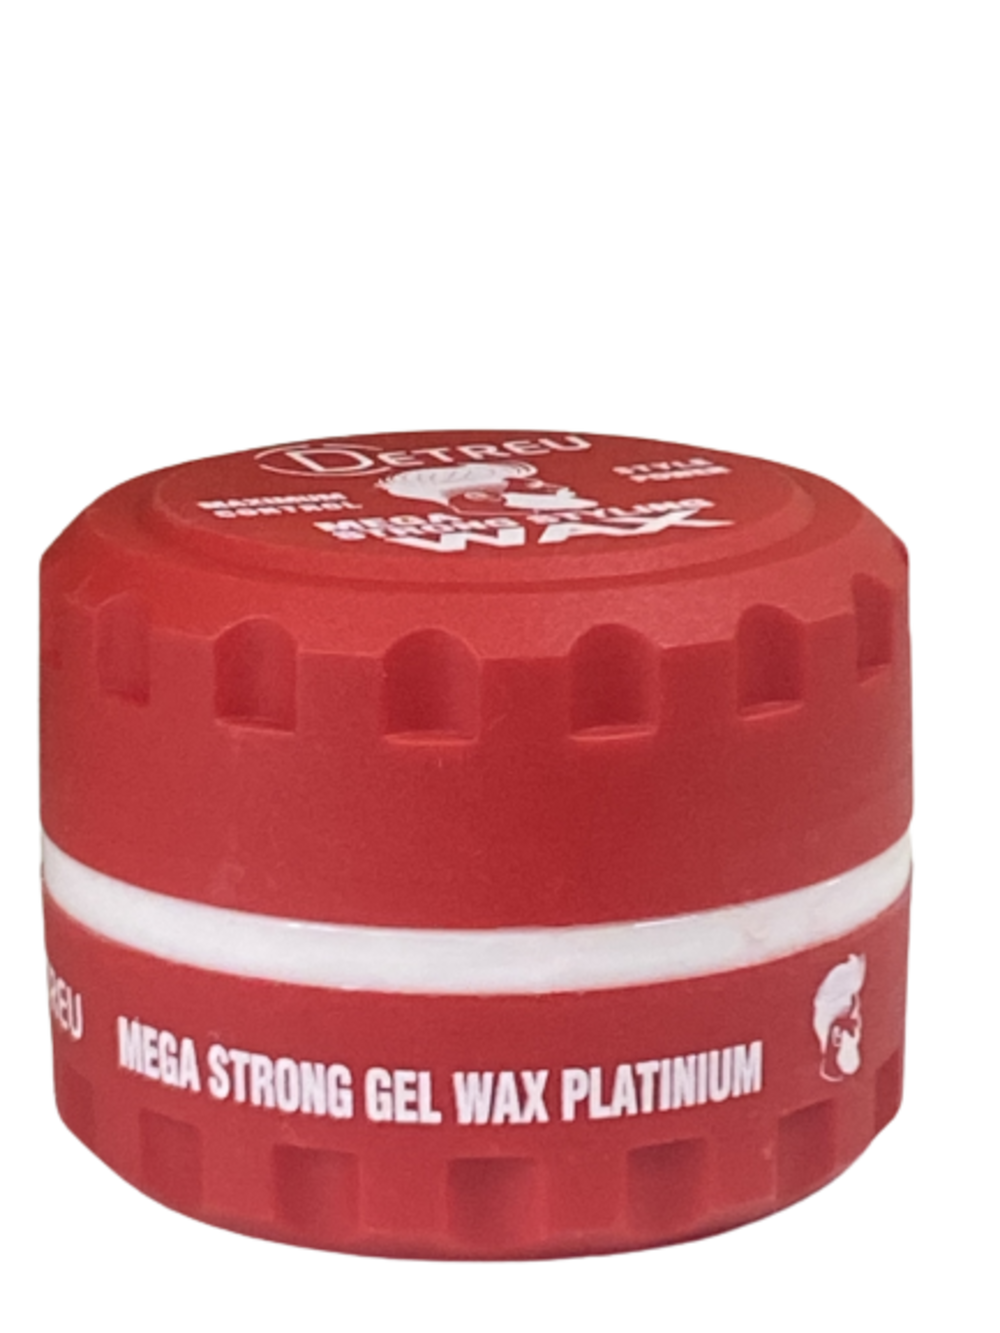 Detreu Mega Strong Styling Gel Wax Red 140 ml - Africa Products Shop